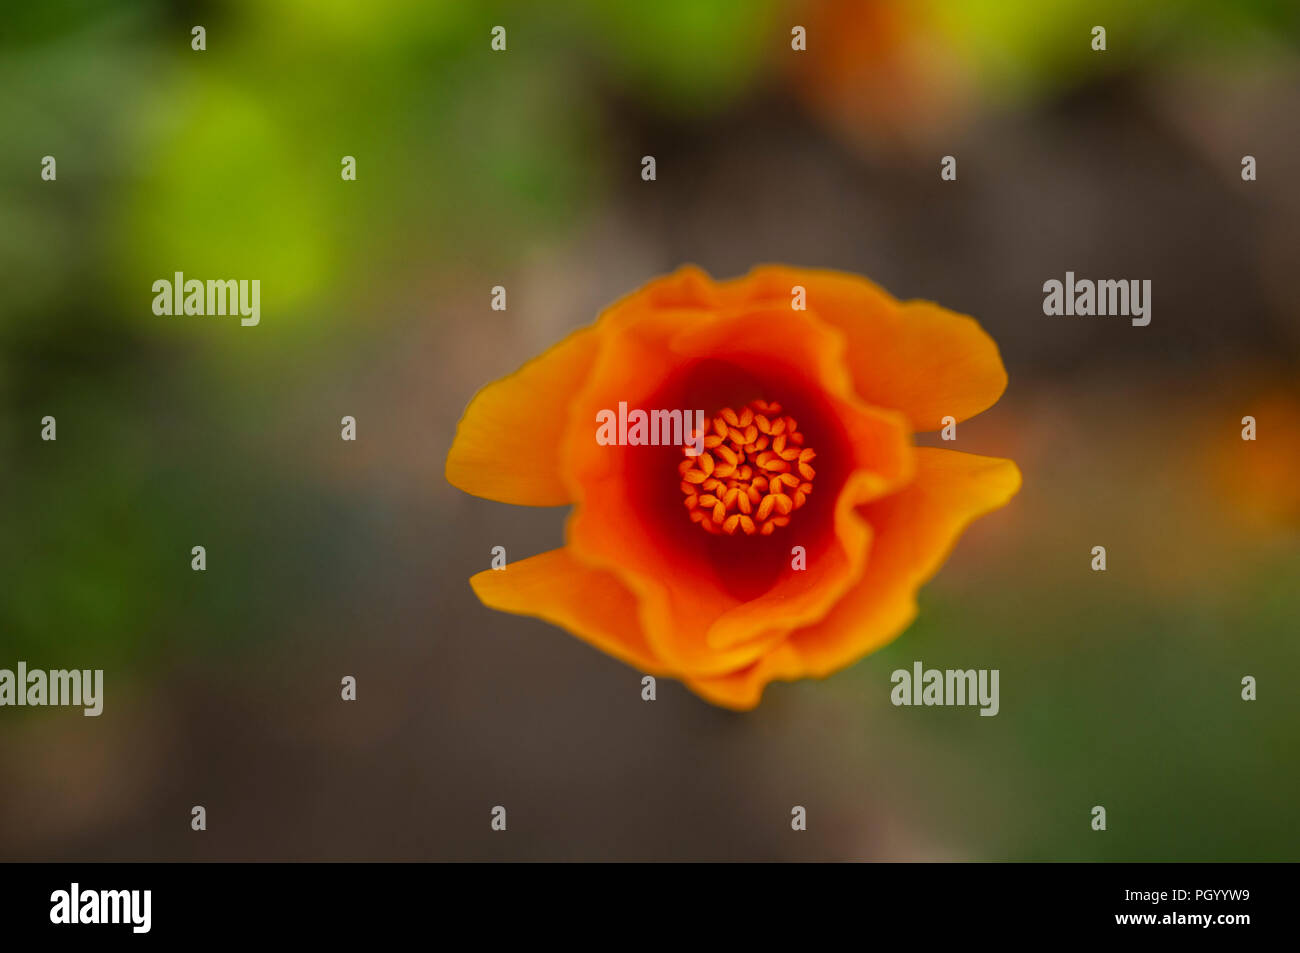 A close up, overhead view of a single California poppy. Stock Photo